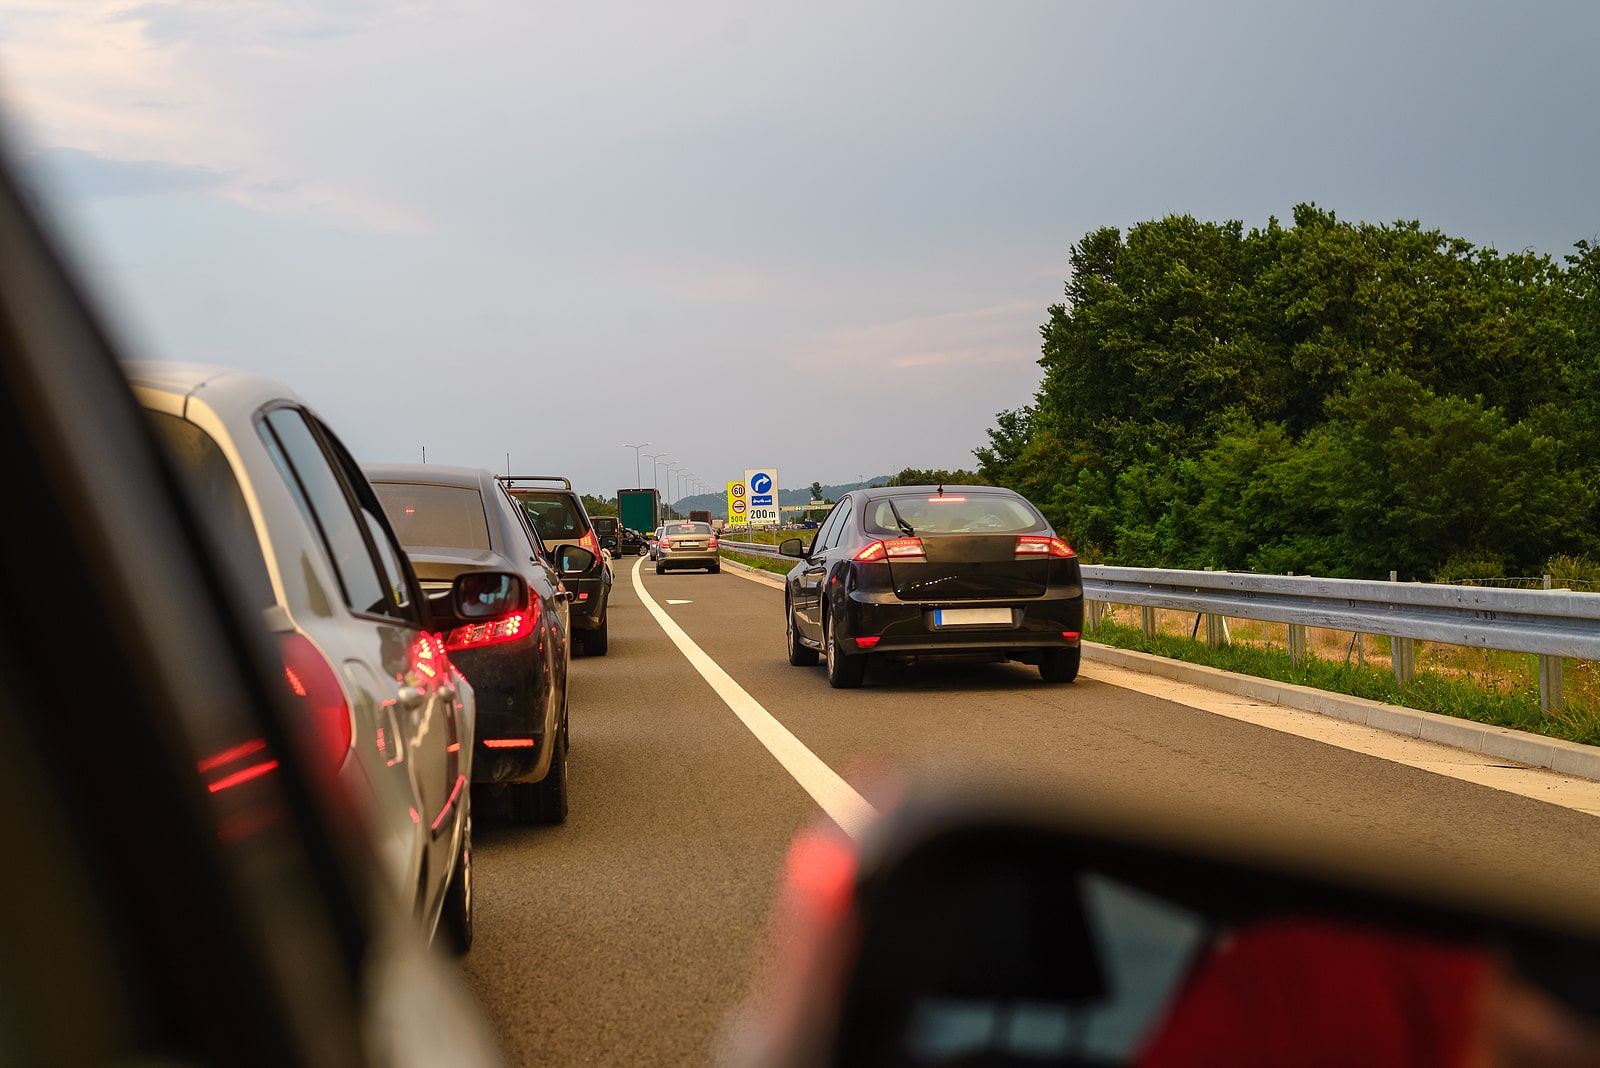 Causes of Car Accidents: What Risks Will You Encounter on the Road?